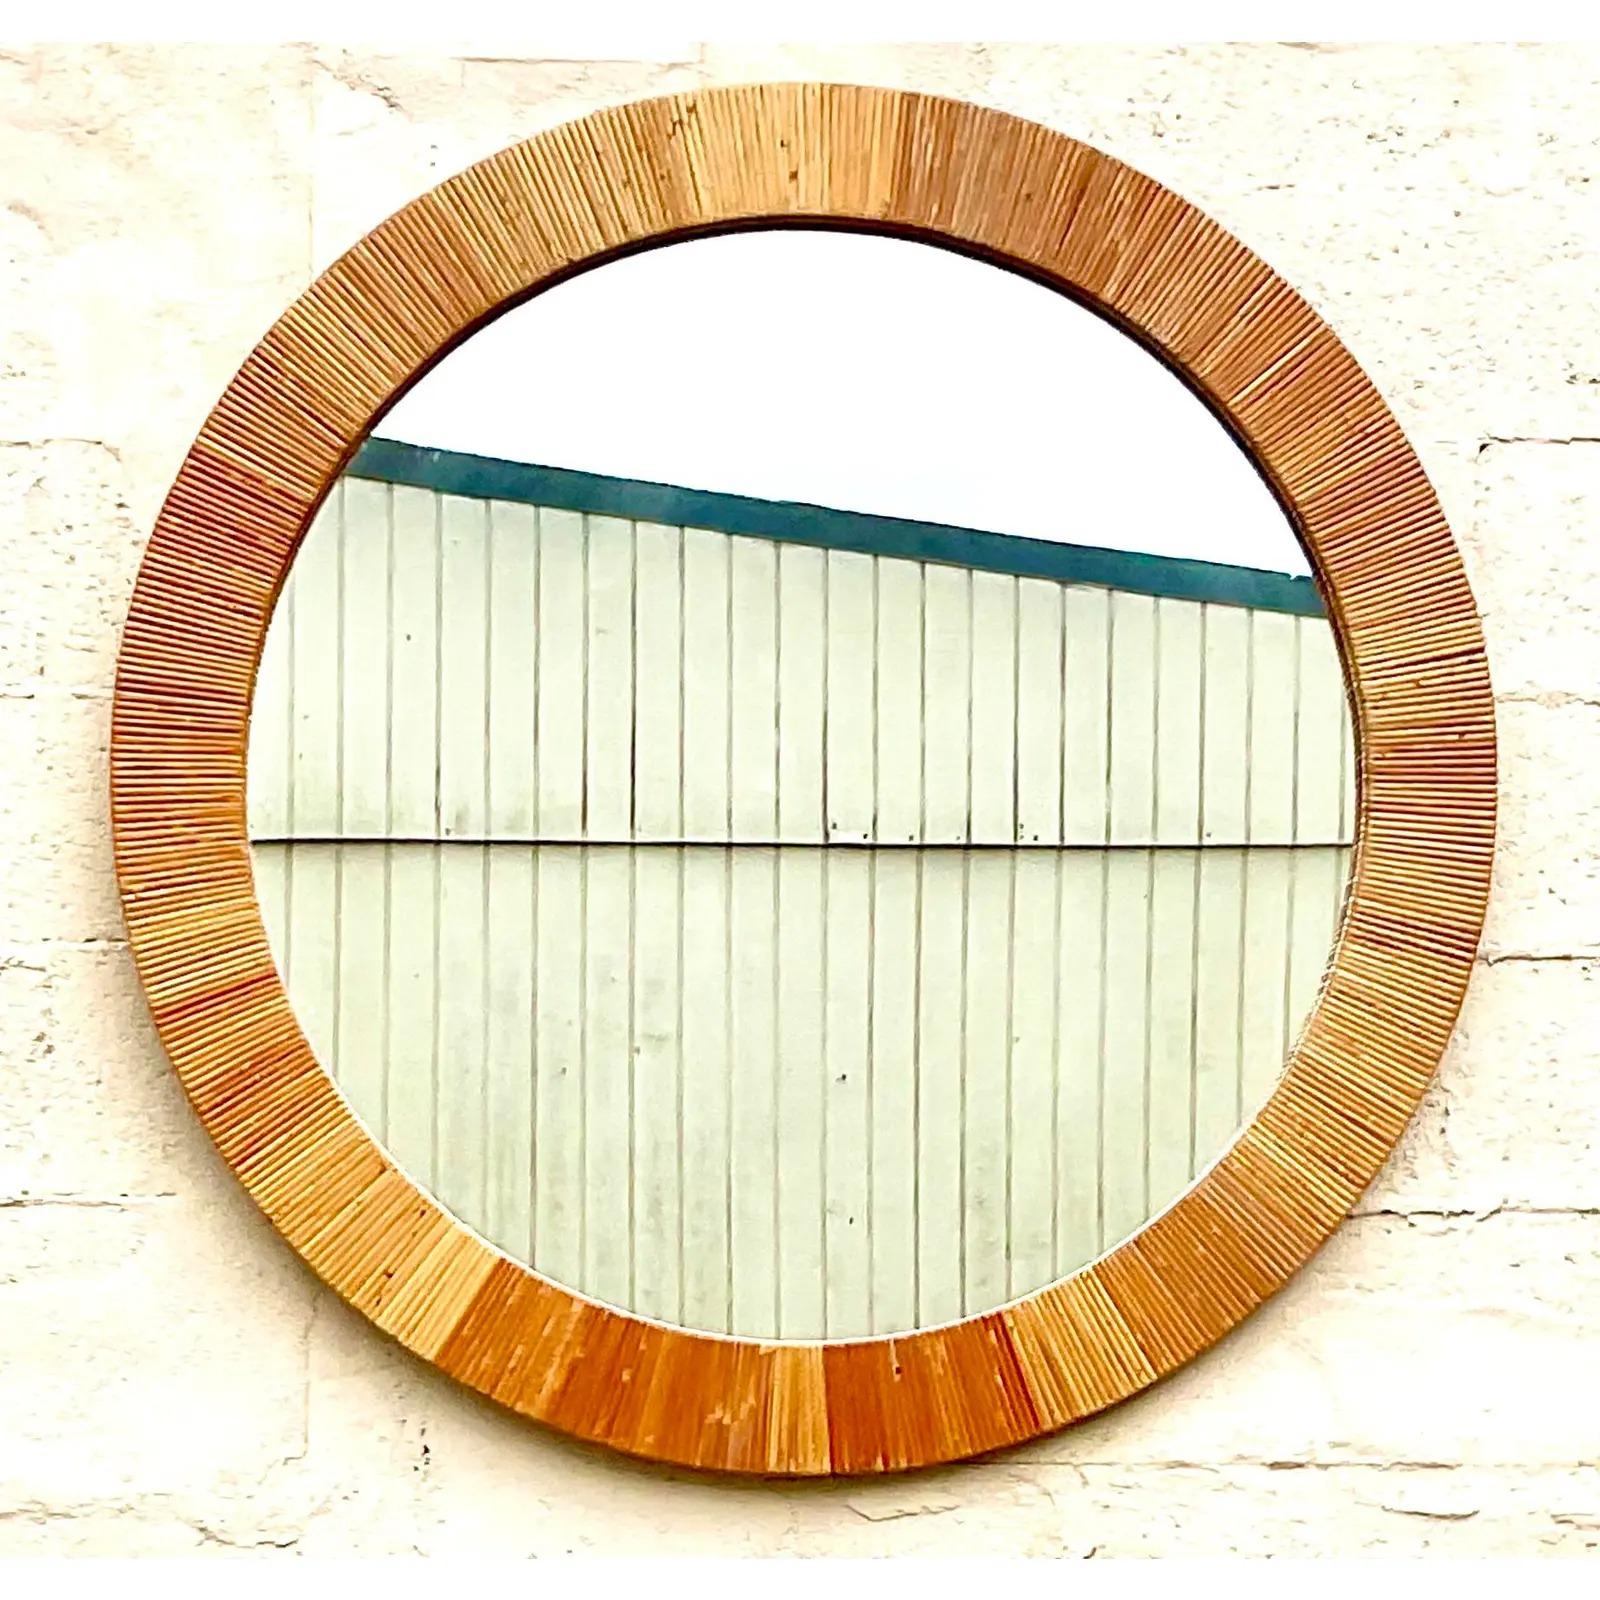 Fantastic vintage Coastal wall mirror. Made by the iconic Bielecky Brothers and tagged on the back. Beautiful wrapped rattan in a round shape. Acquired from a Palm Beach estate.